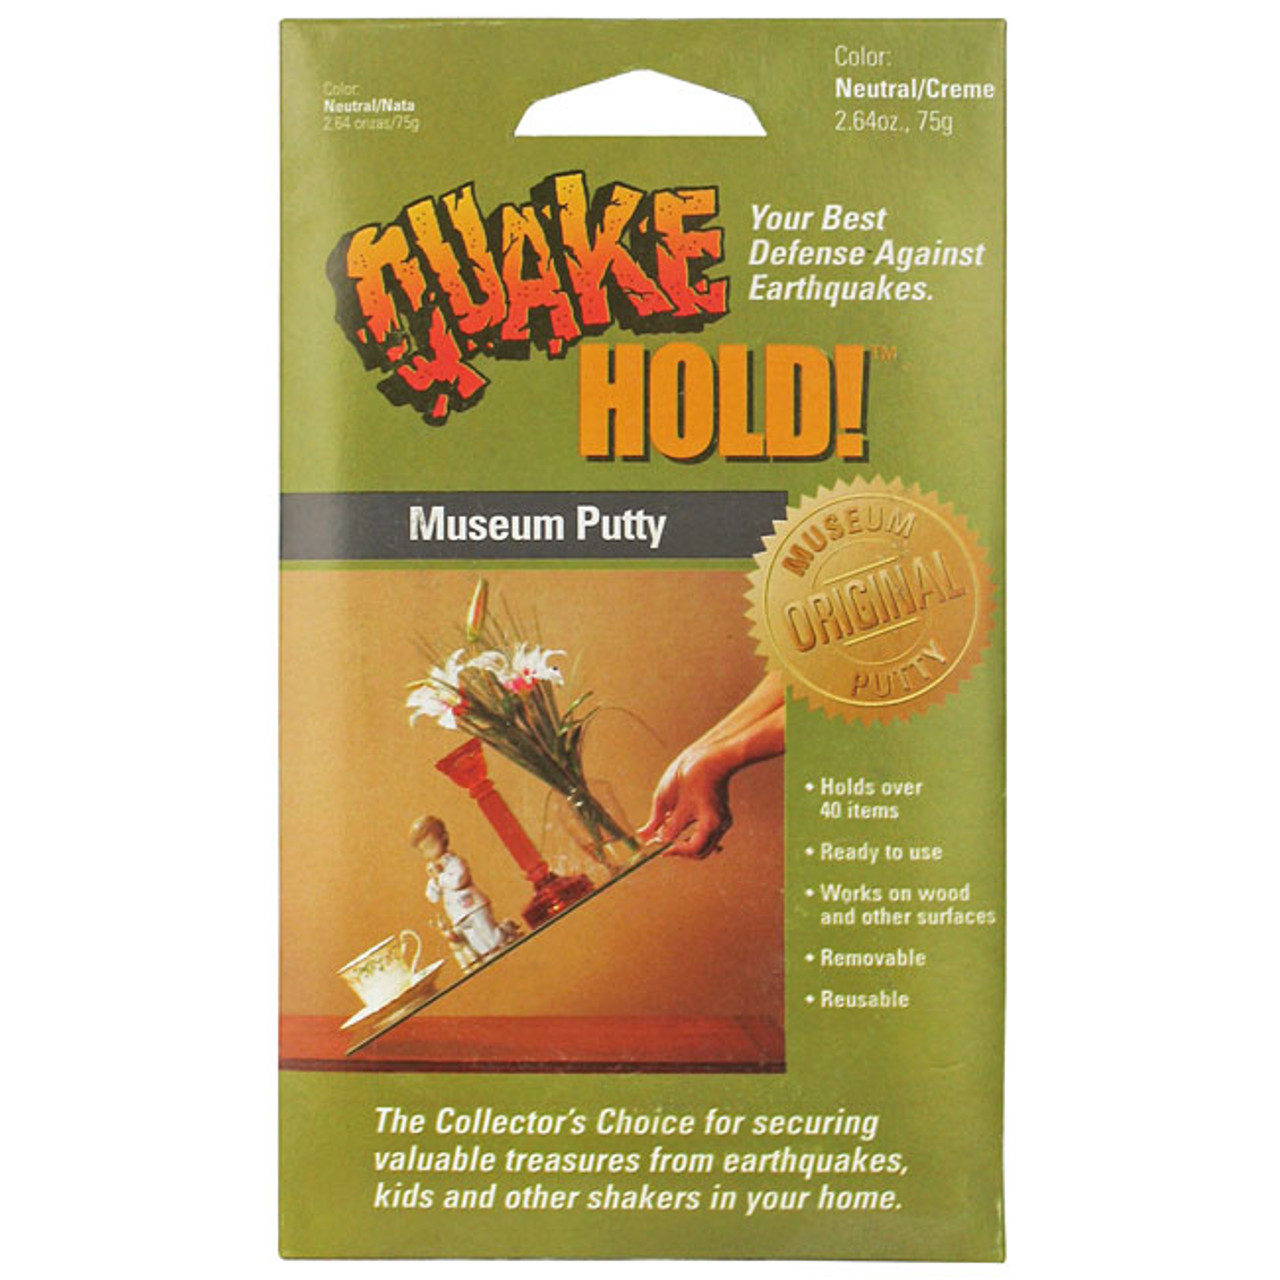 Quakehold! Hold Museum Putty,Non-Toxic & Non-Damaging,Removable